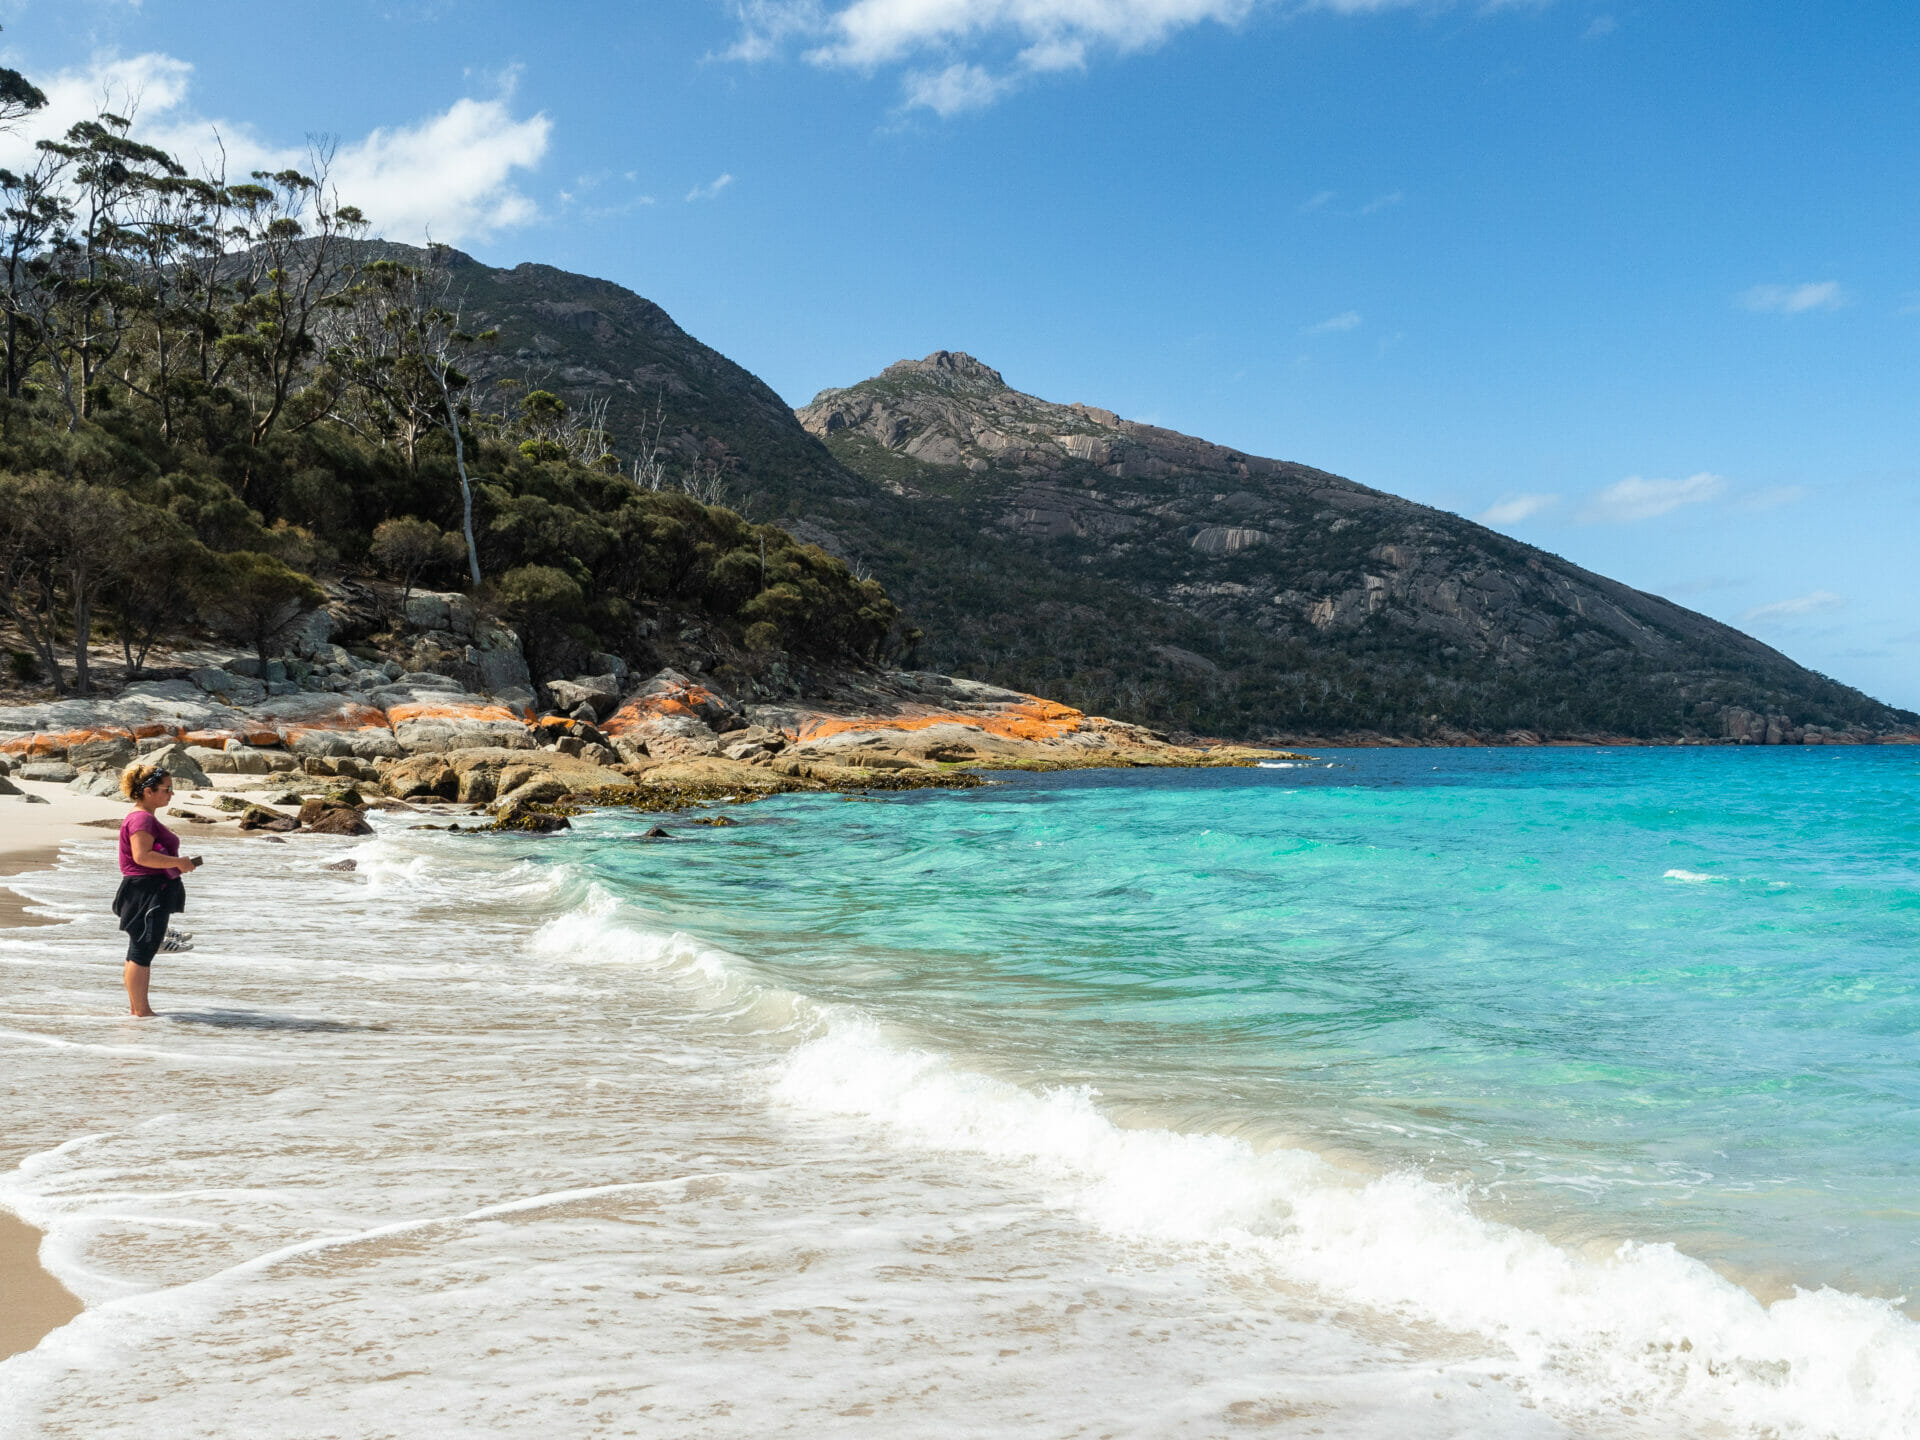 A family relaxing on the pristine white sands of Wineglass Bay beach, surrounded by the natural beauty of the Freycinet Peninsula.